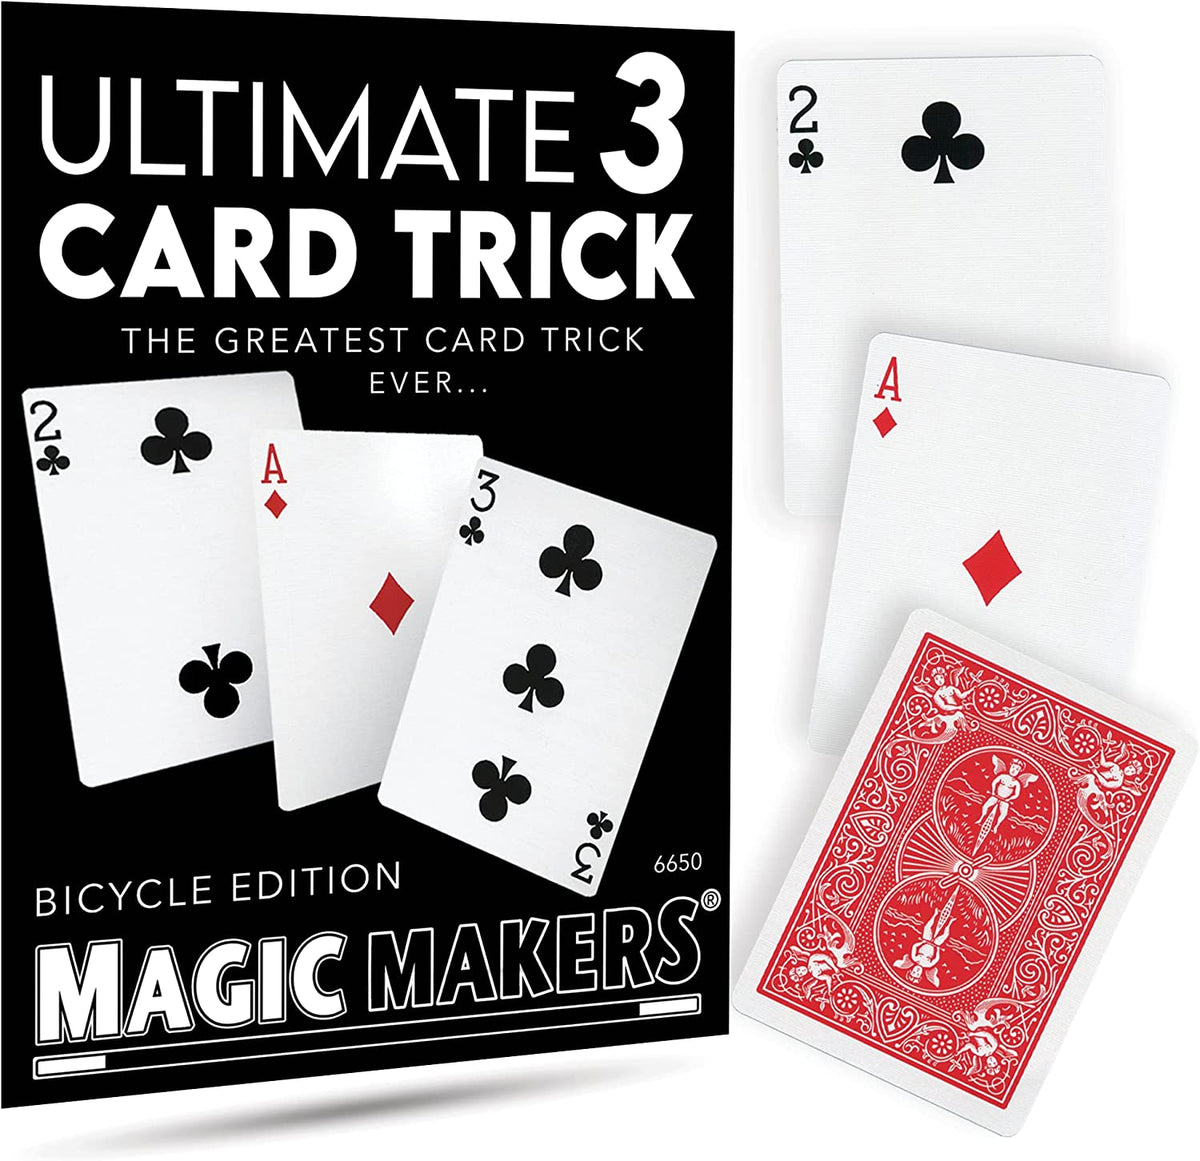 The Ultimate 3 Card Trick - Chase The Ace